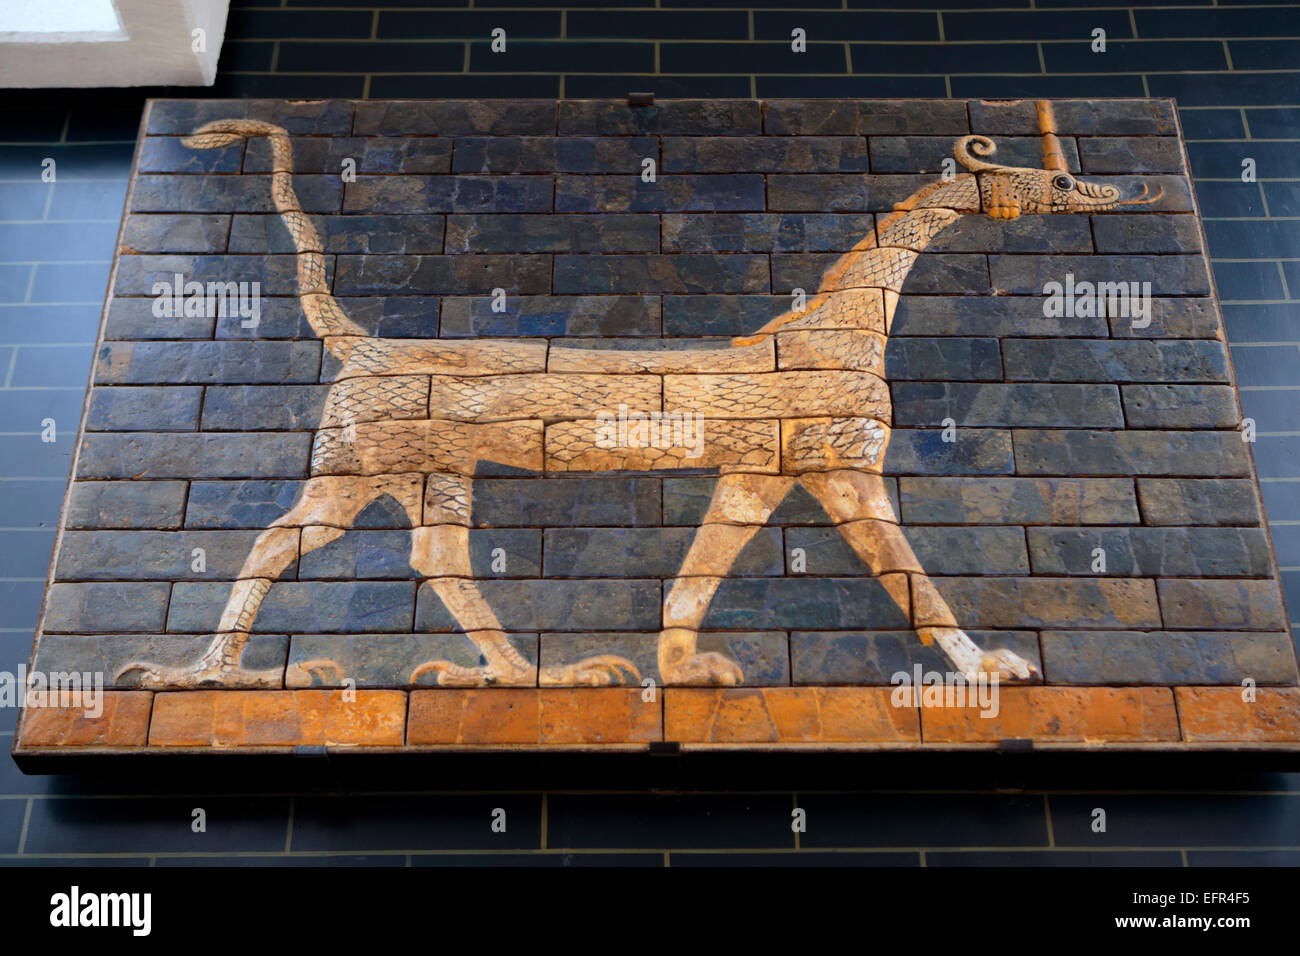 Dragon, Model of Ishtar Gate, Istanbul Archaeology Museums, Istanbul, Turkey Stock Photo